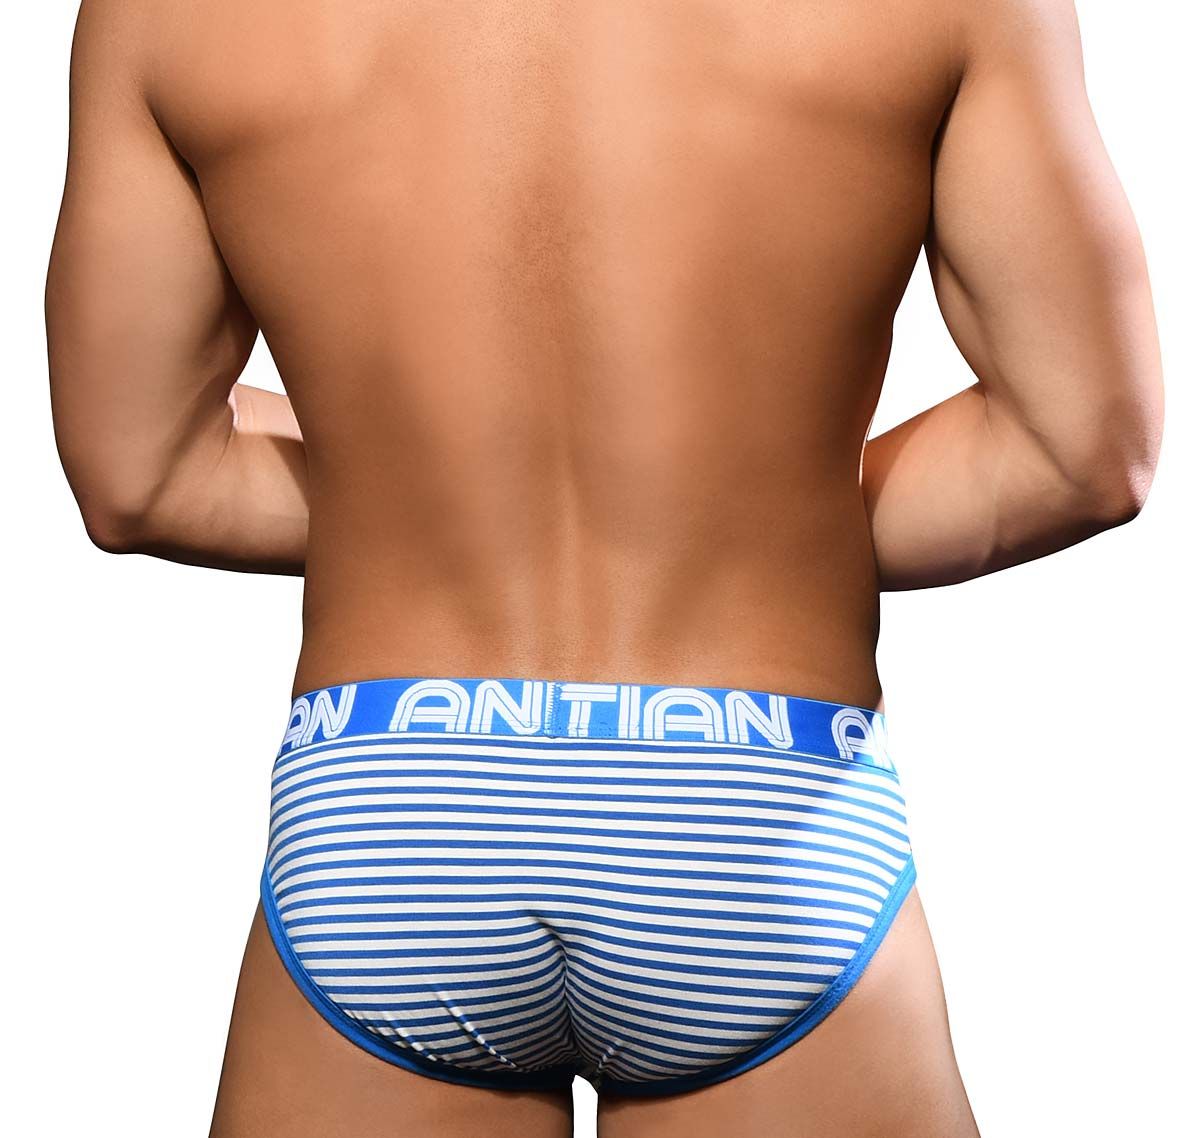 Andrew Christian Slip FLY BRIEF w/ ALMOST NAKED 92738, azul/blanco